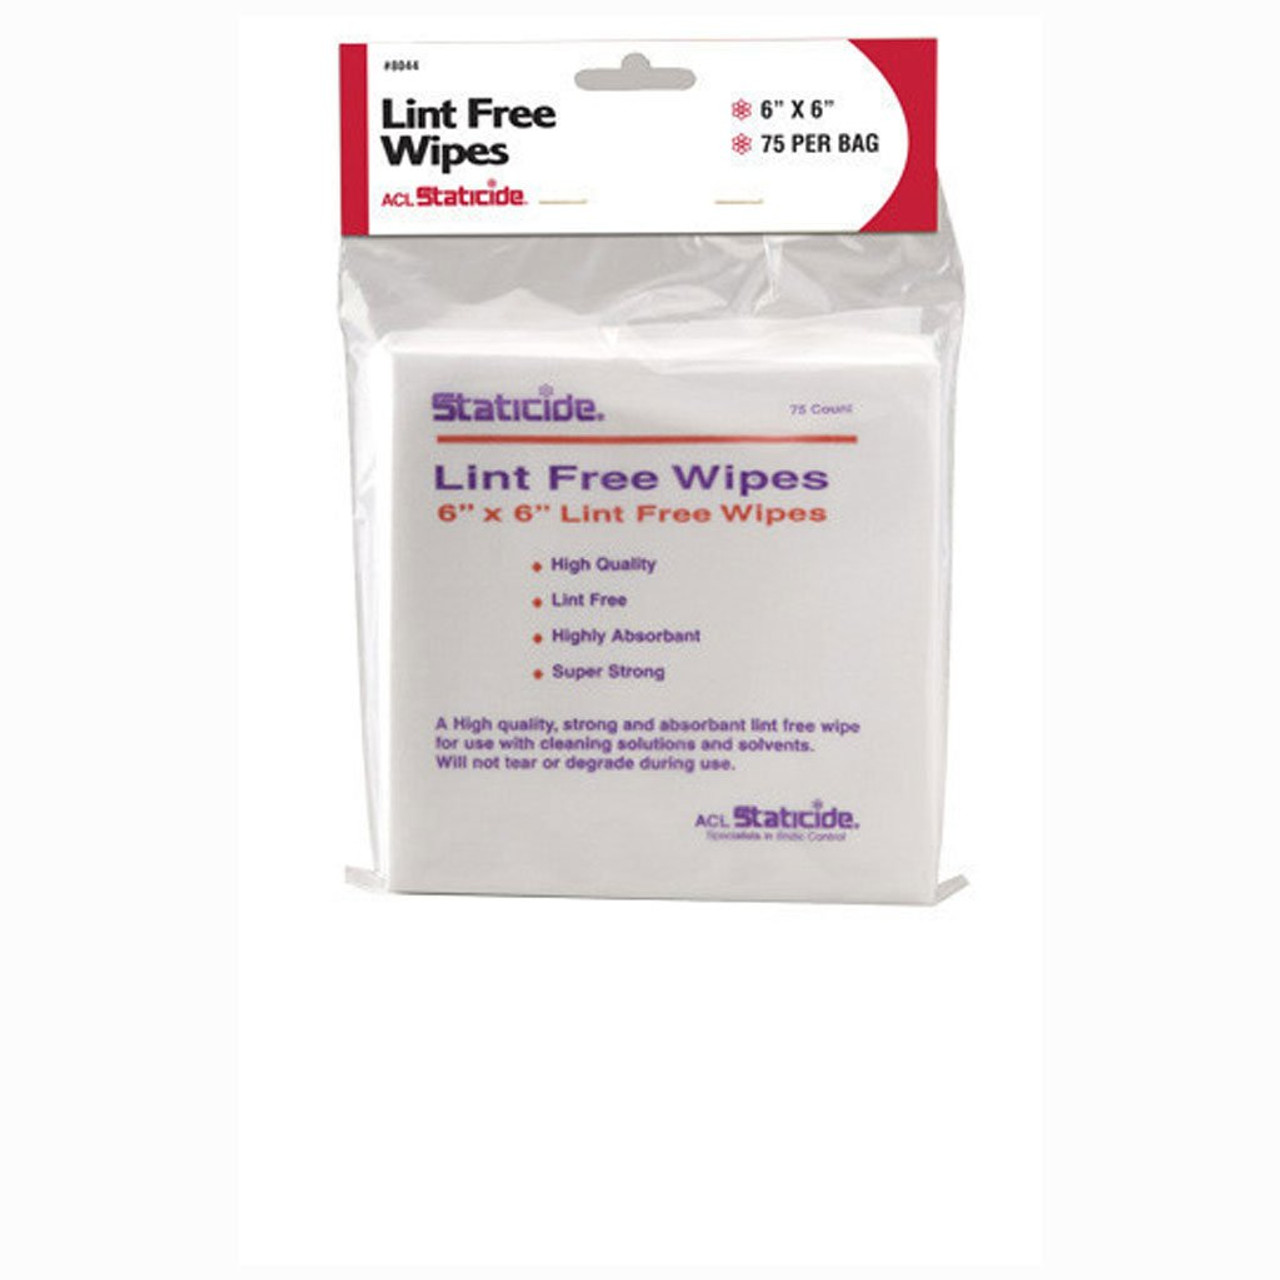 ACL Staticide 8044 Lint Free Wipes 6 in x 6 in